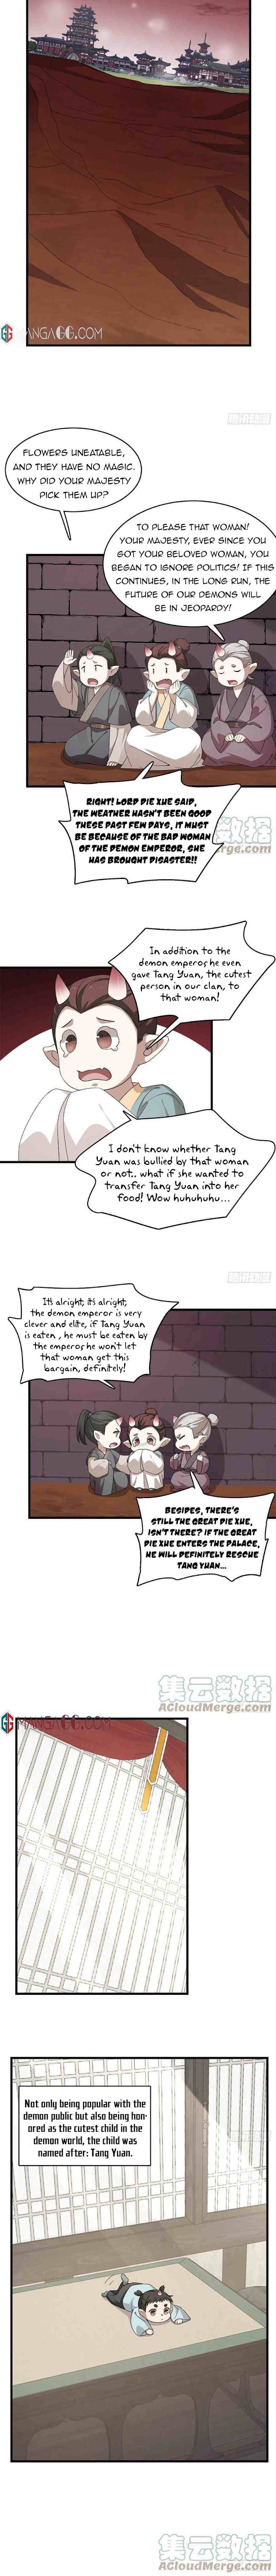 Queen Of Poison: The Legend Of A Super Agent, Doctor And Princess - Page 3